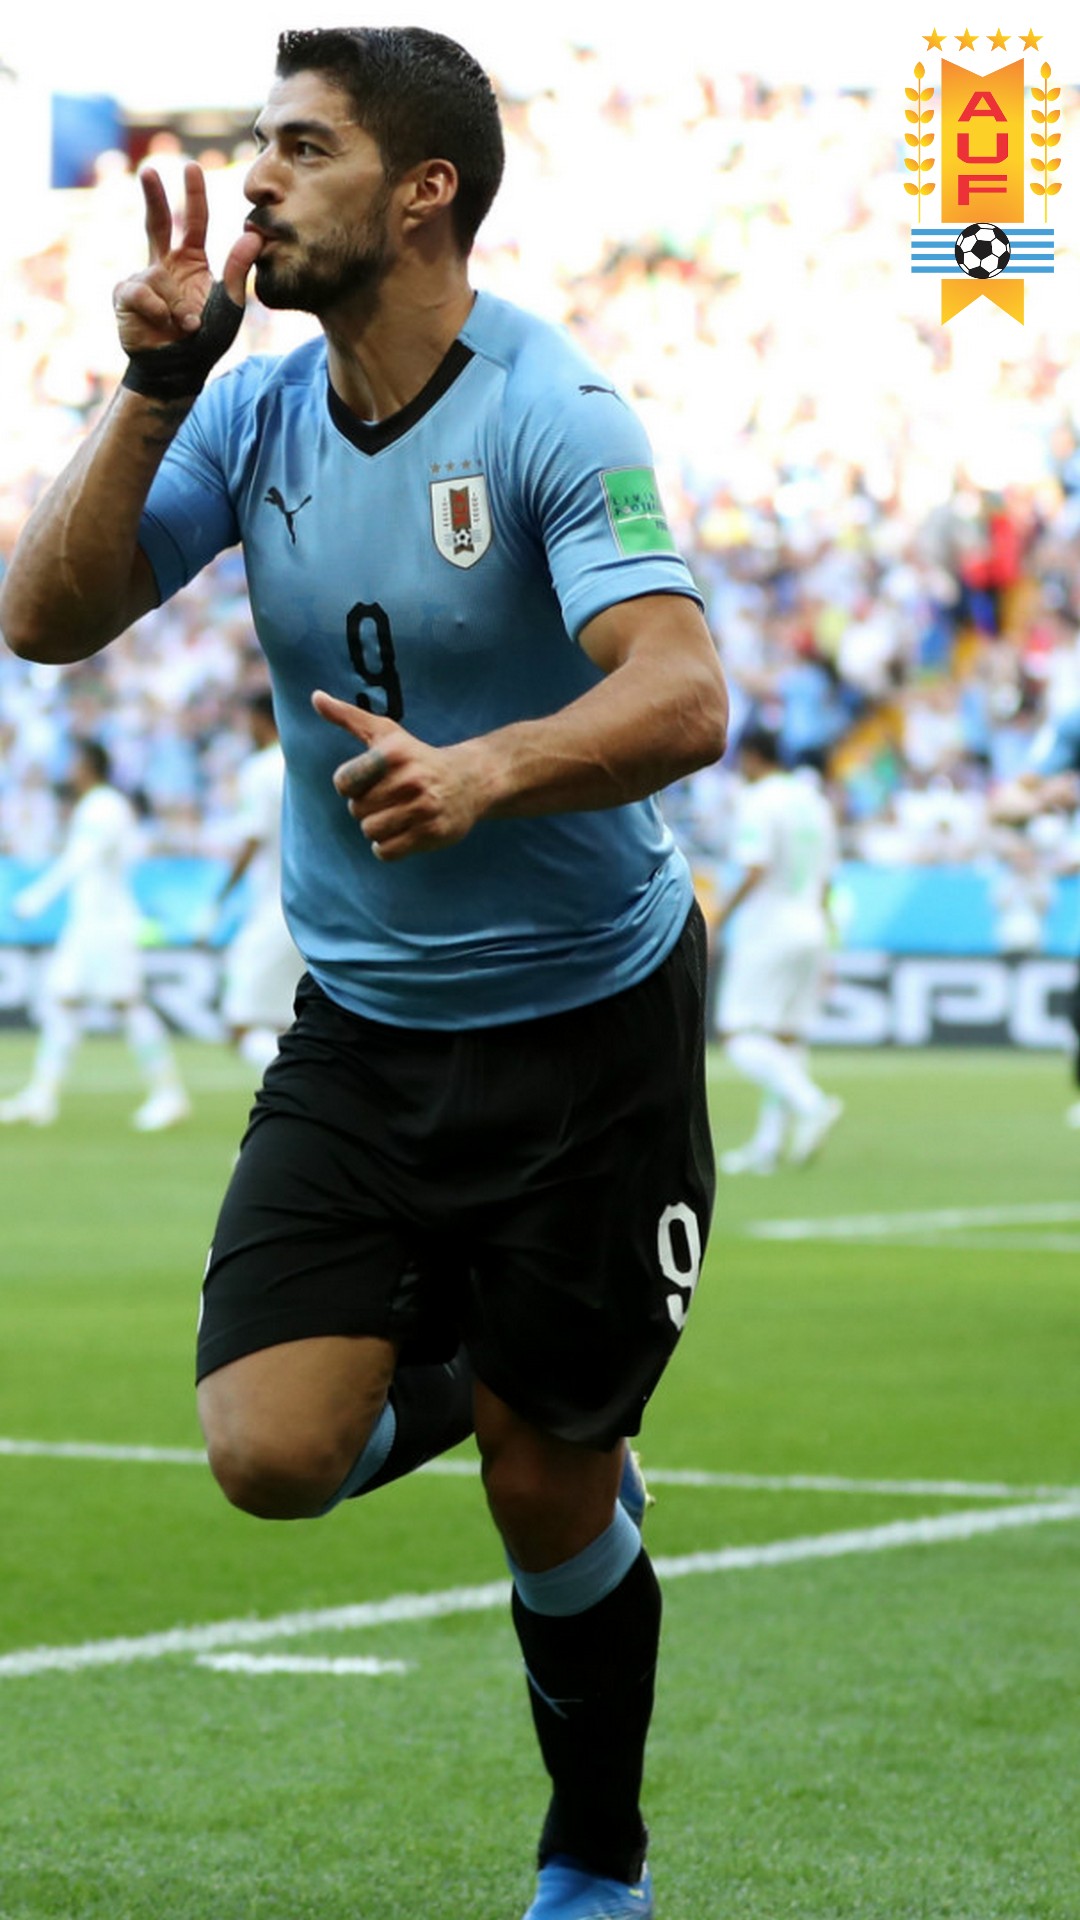 Luis Suarez Uruguay Mobile Wallpaper With Resolution 1080X1920 pixel. You can make this wallpaper for your Mac or Windows Desktop Background, iPhone, Android or Tablet and another Smartphone device for free